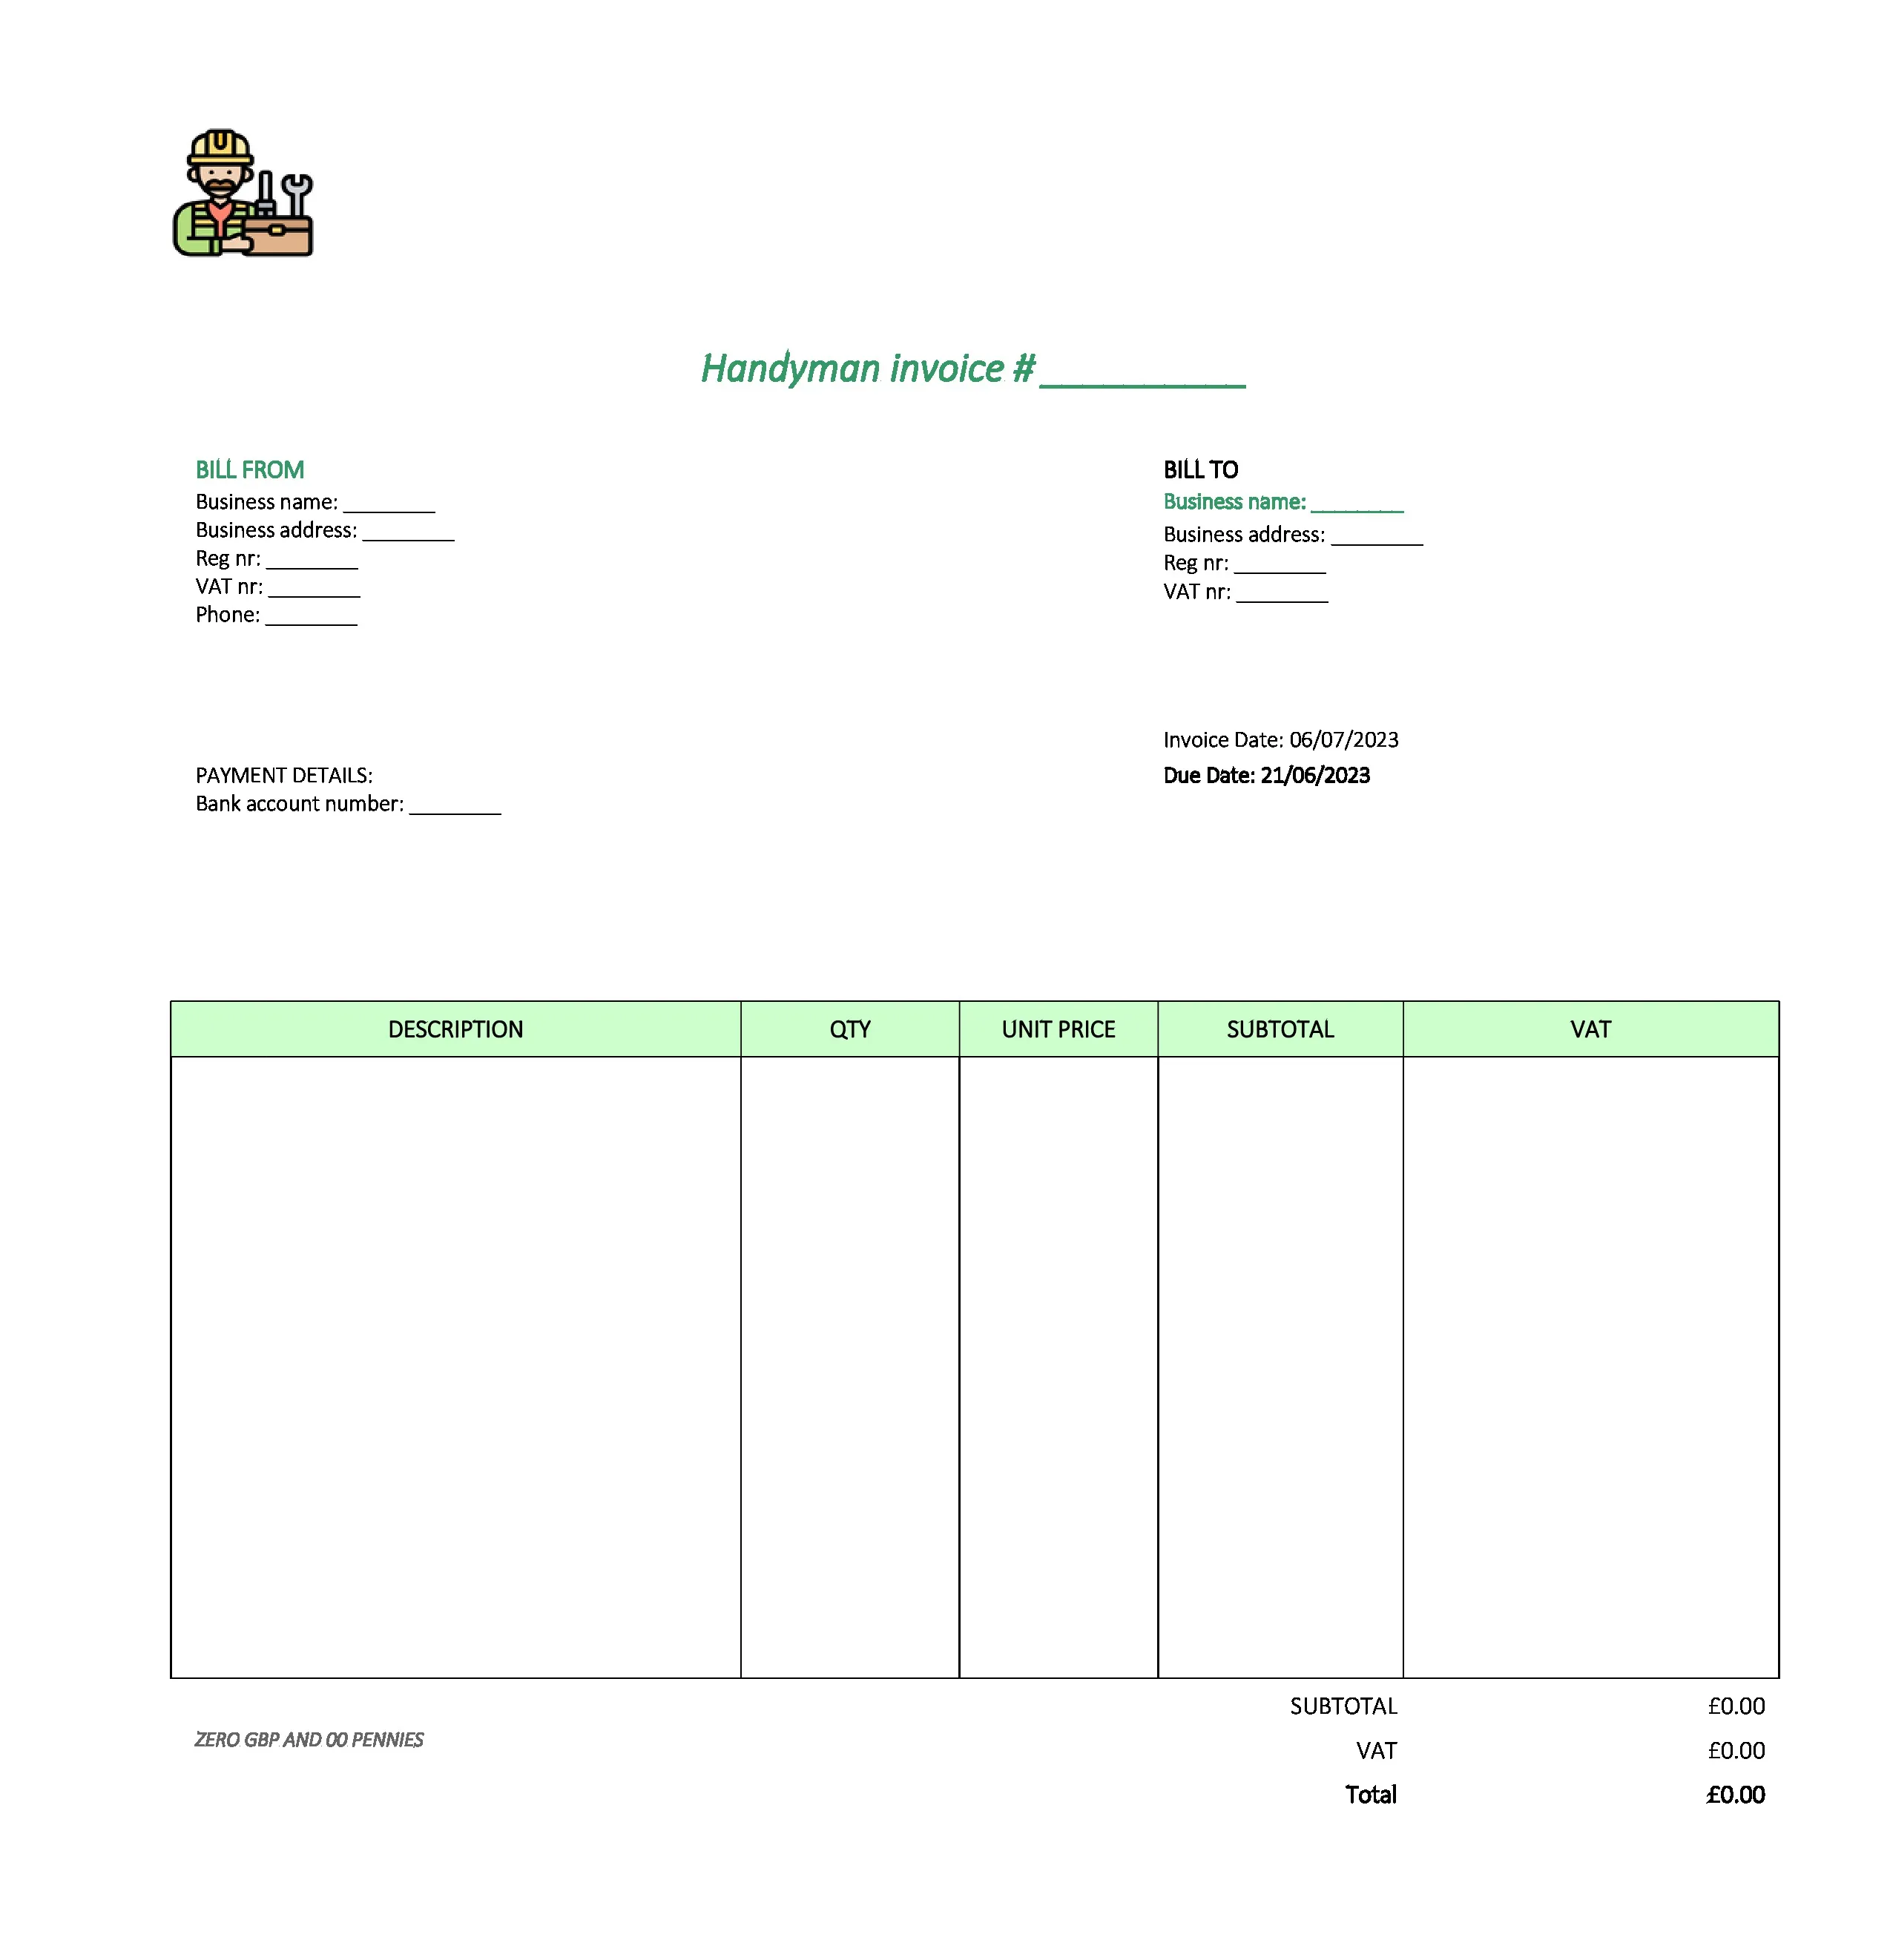 with logo handyman invoice template UK Excel / Google sheets